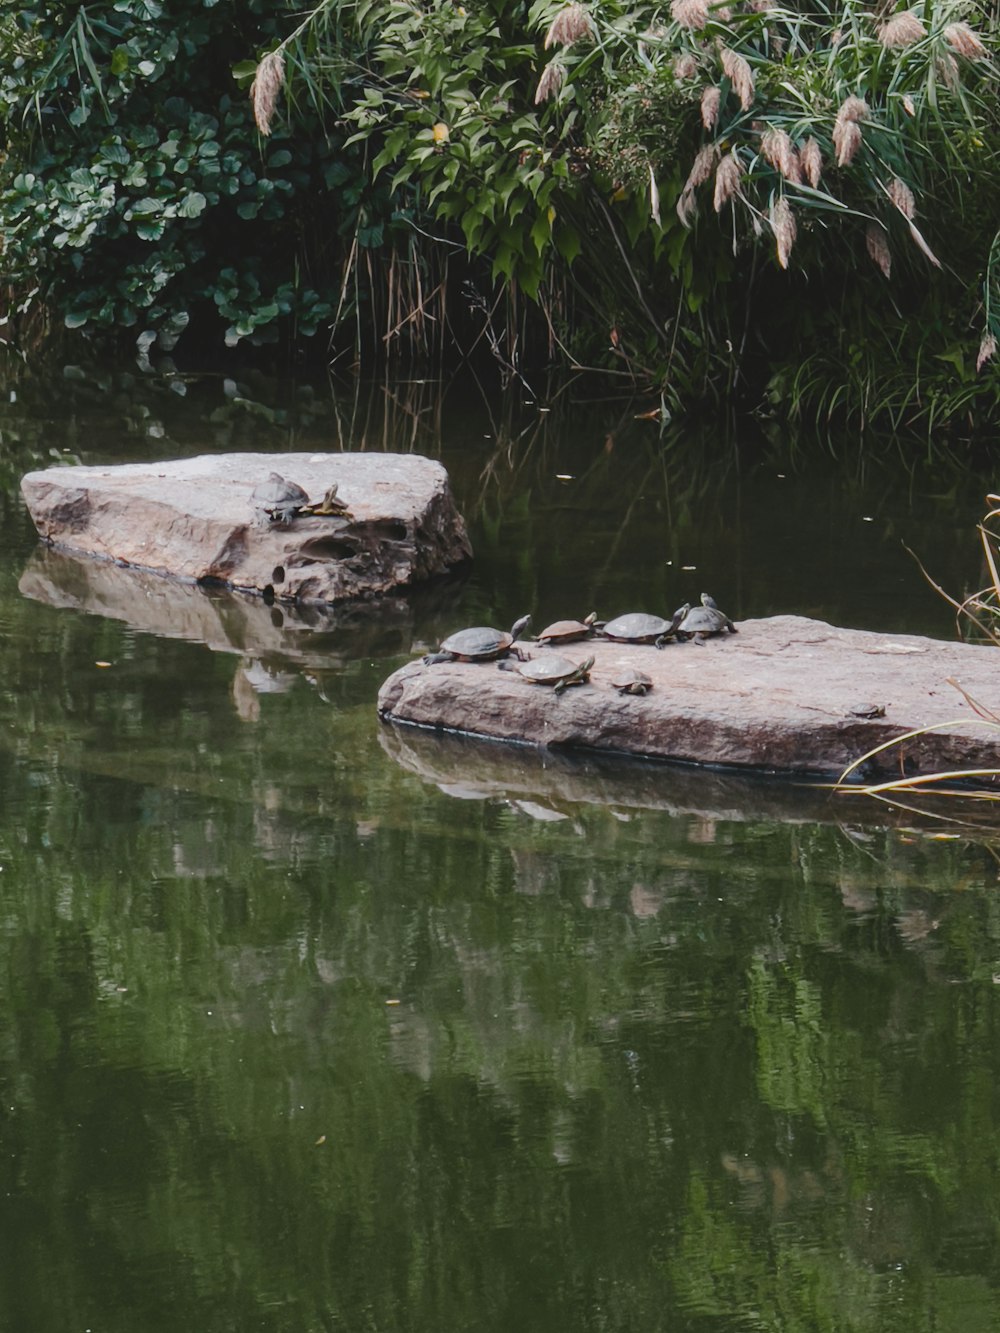 a group of turtles on a log in a pond